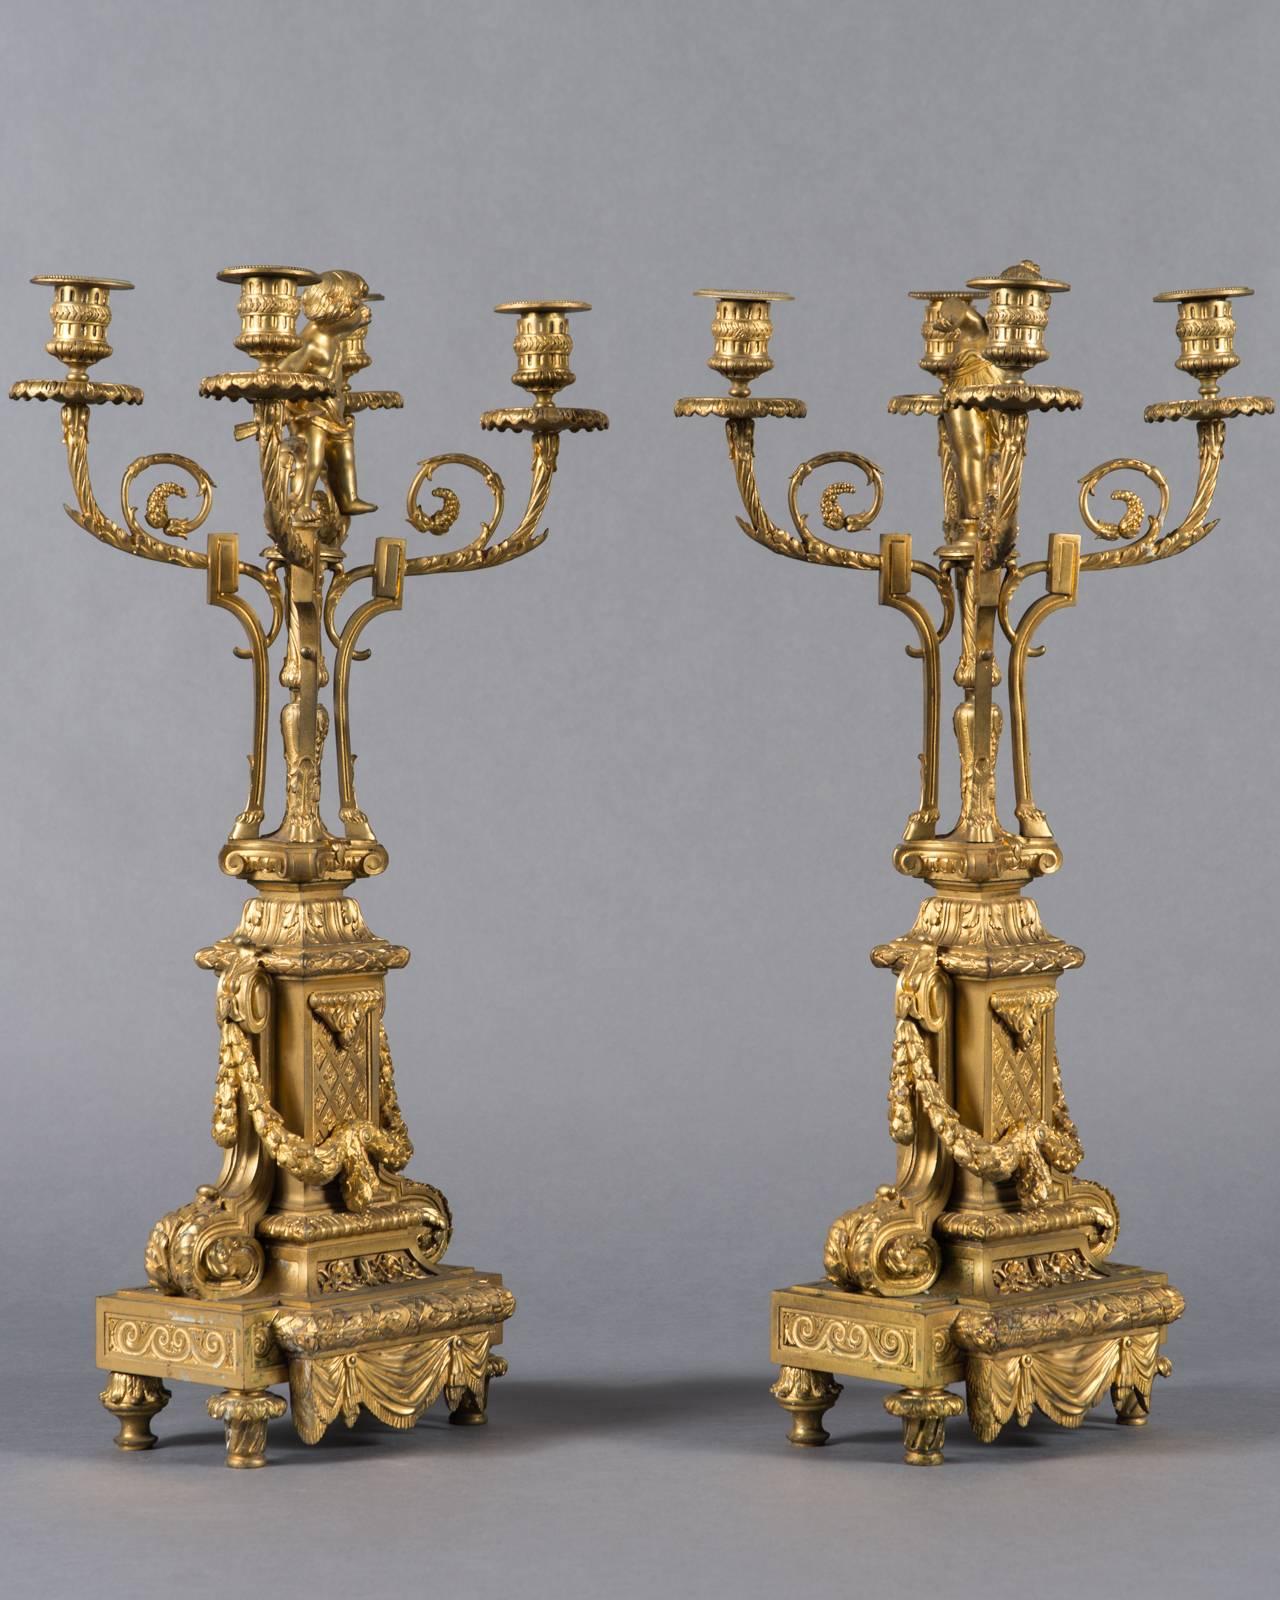 A Pair of large 19th century Napoleon III French Gilt Bronze Four-branch Figural Candelabras. One candelabra with surmounted figure of a boy and the other with a figure of a girl. 

Circa: 1870

Dimensions
Height: 24